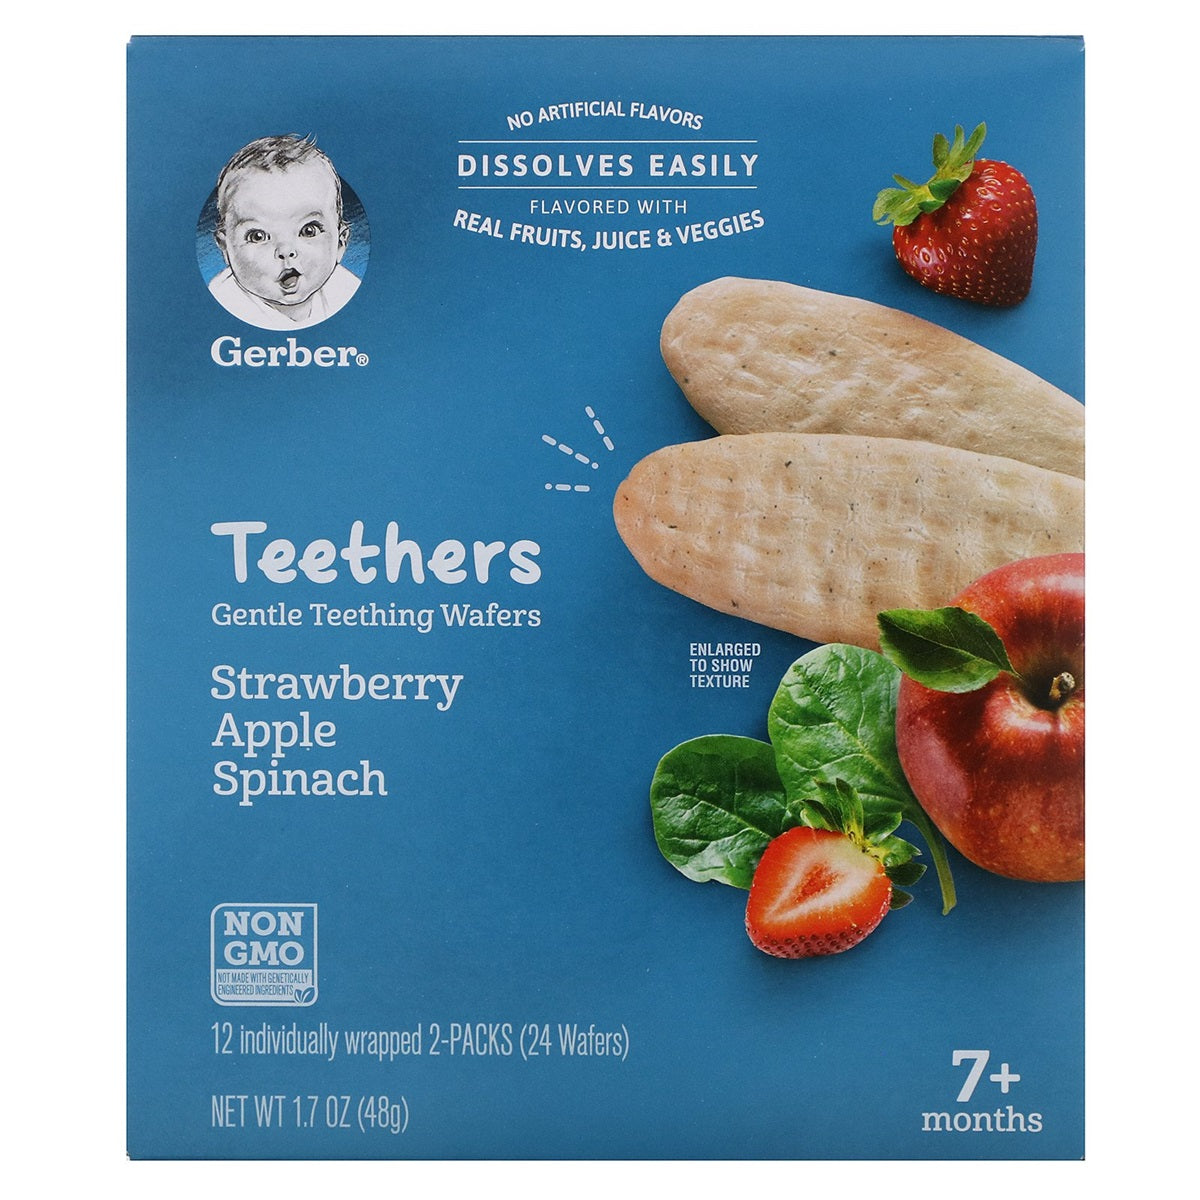 Gerber Snacks for Baby, Teethers Teething Wafers, Strawberry, Apple Spinach